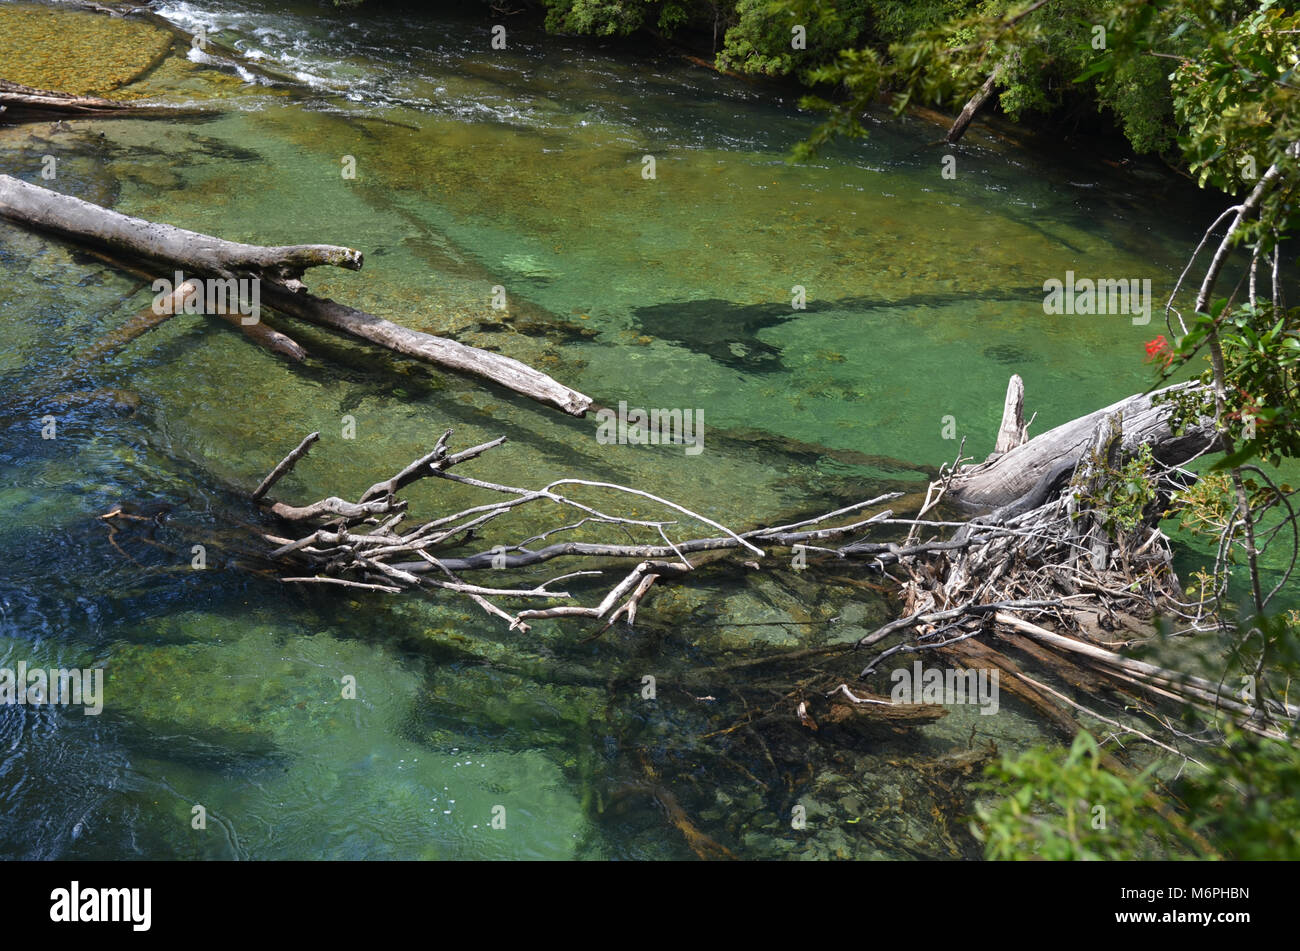 Valdivian temperate rainforests in southern Chile (Chilean Patagonia) Stock Photo